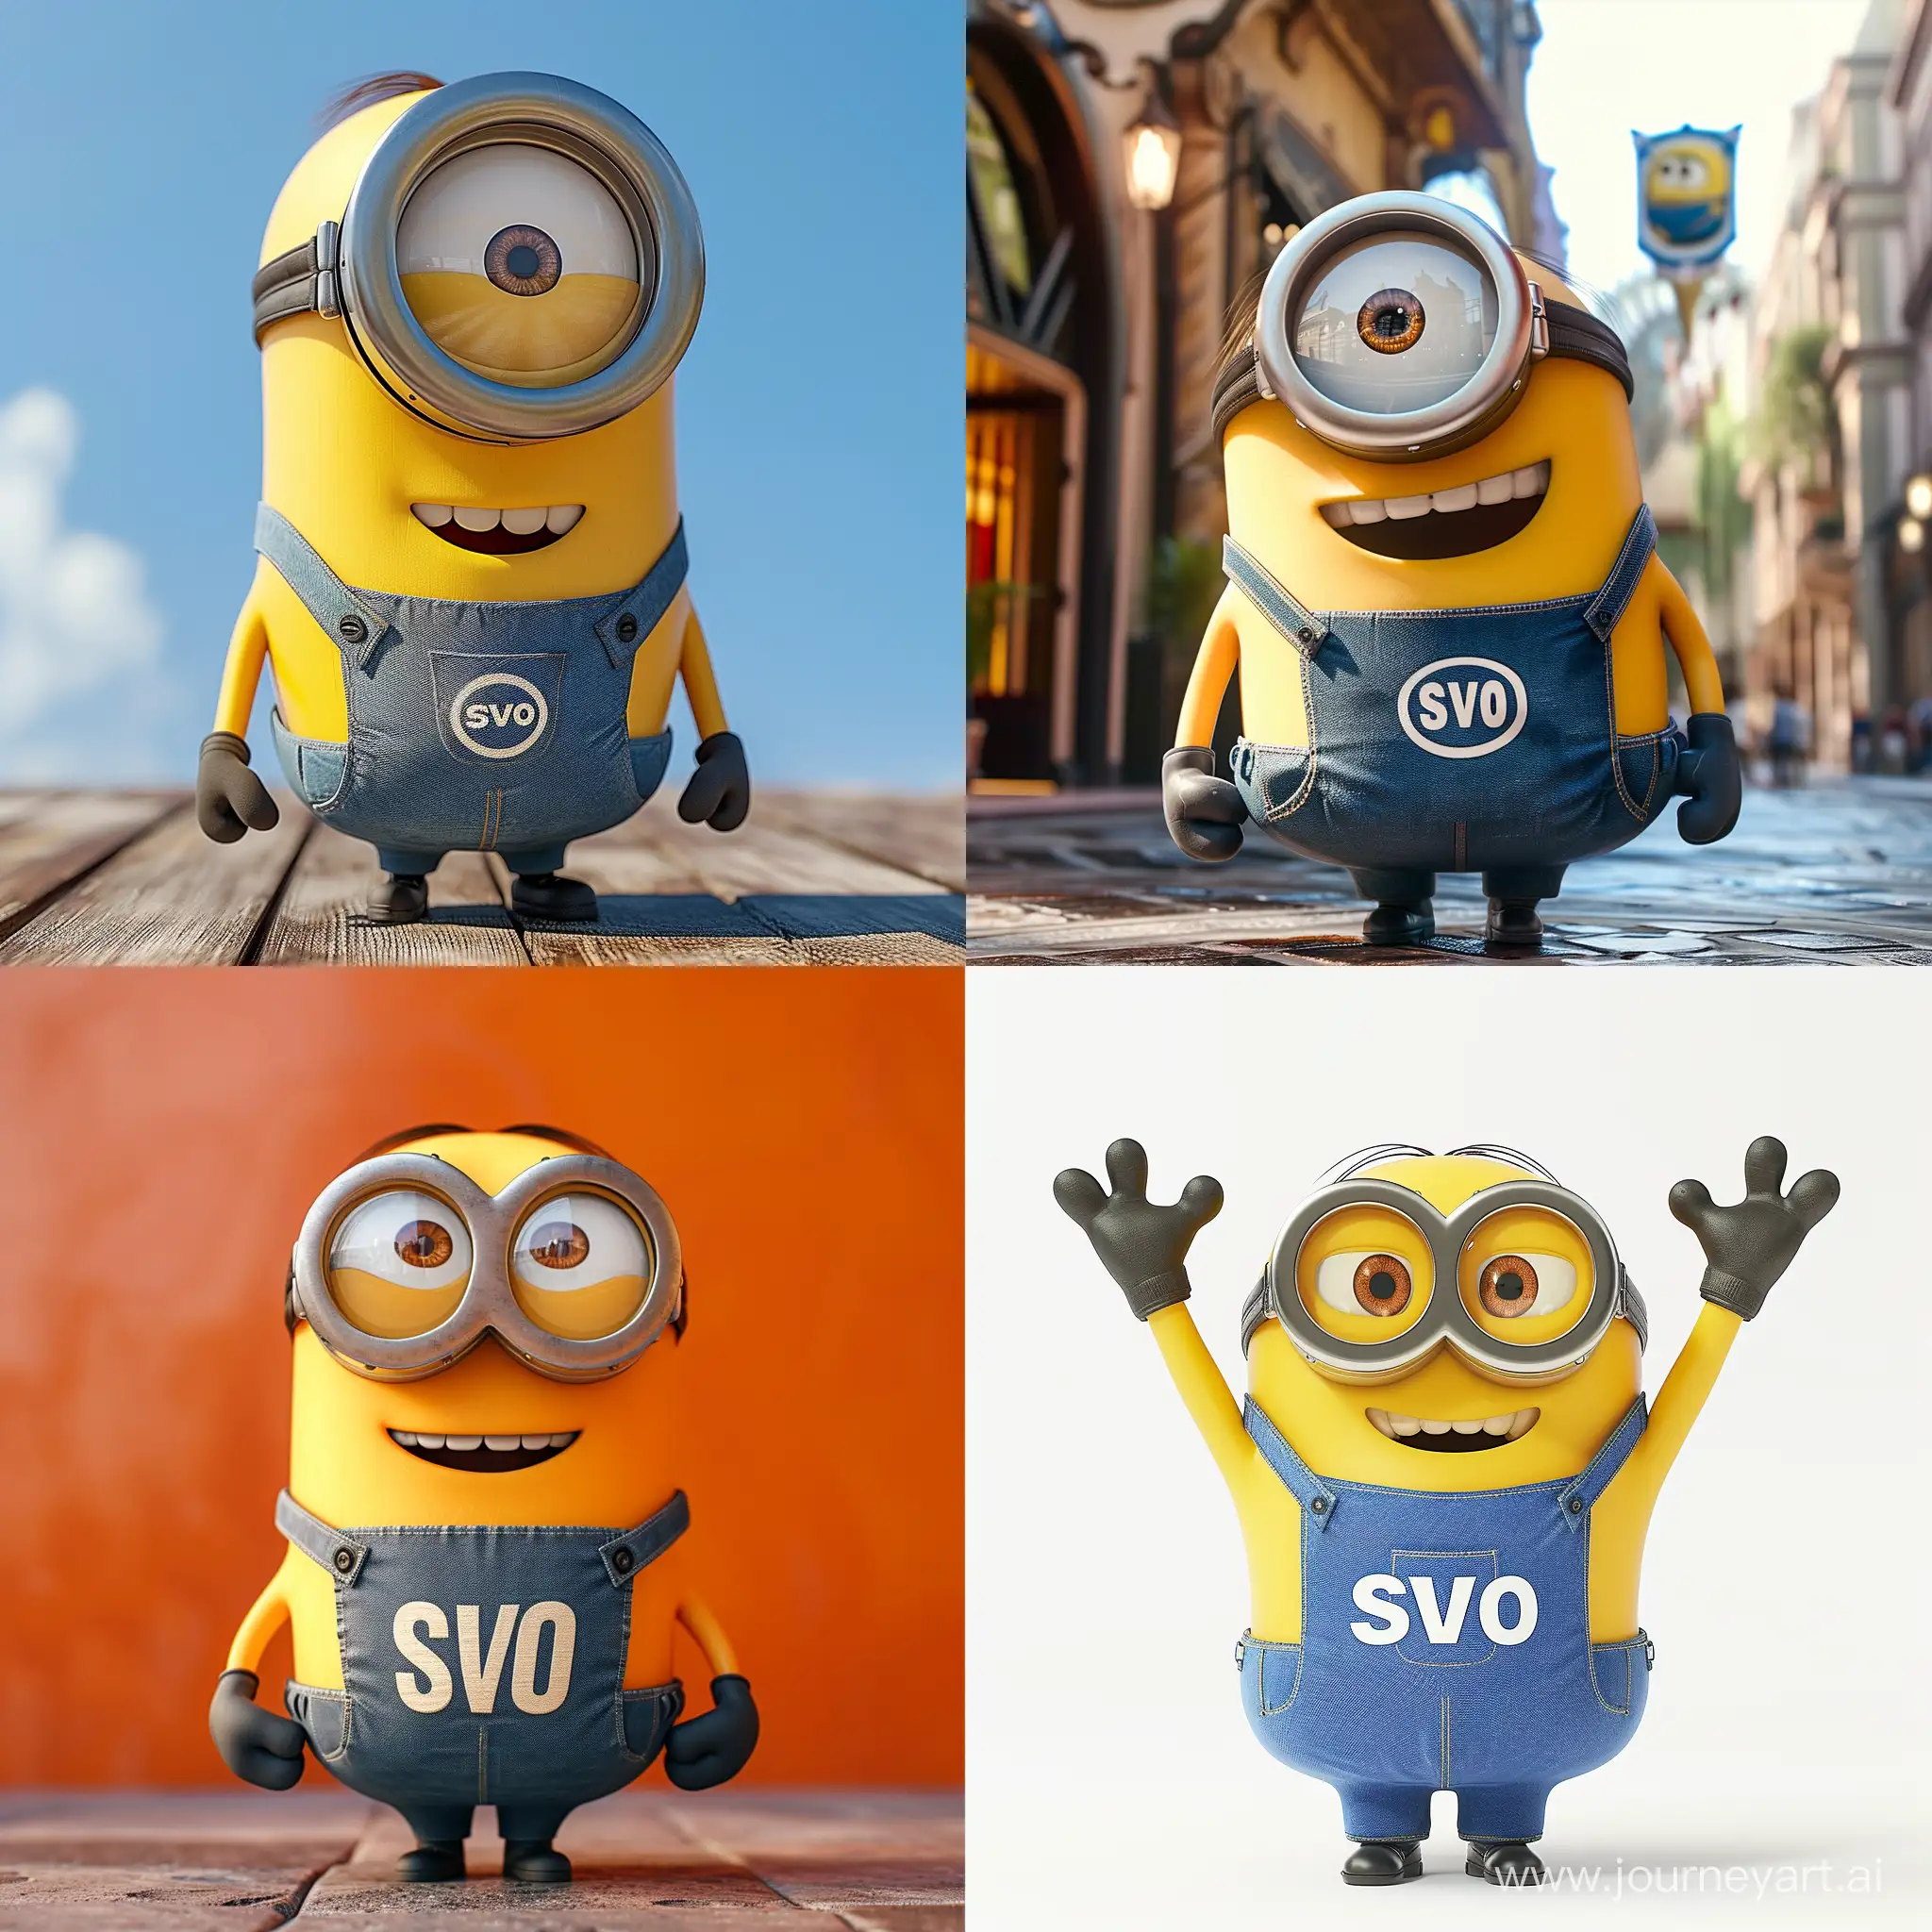 big minion in t-shirt with SVO text